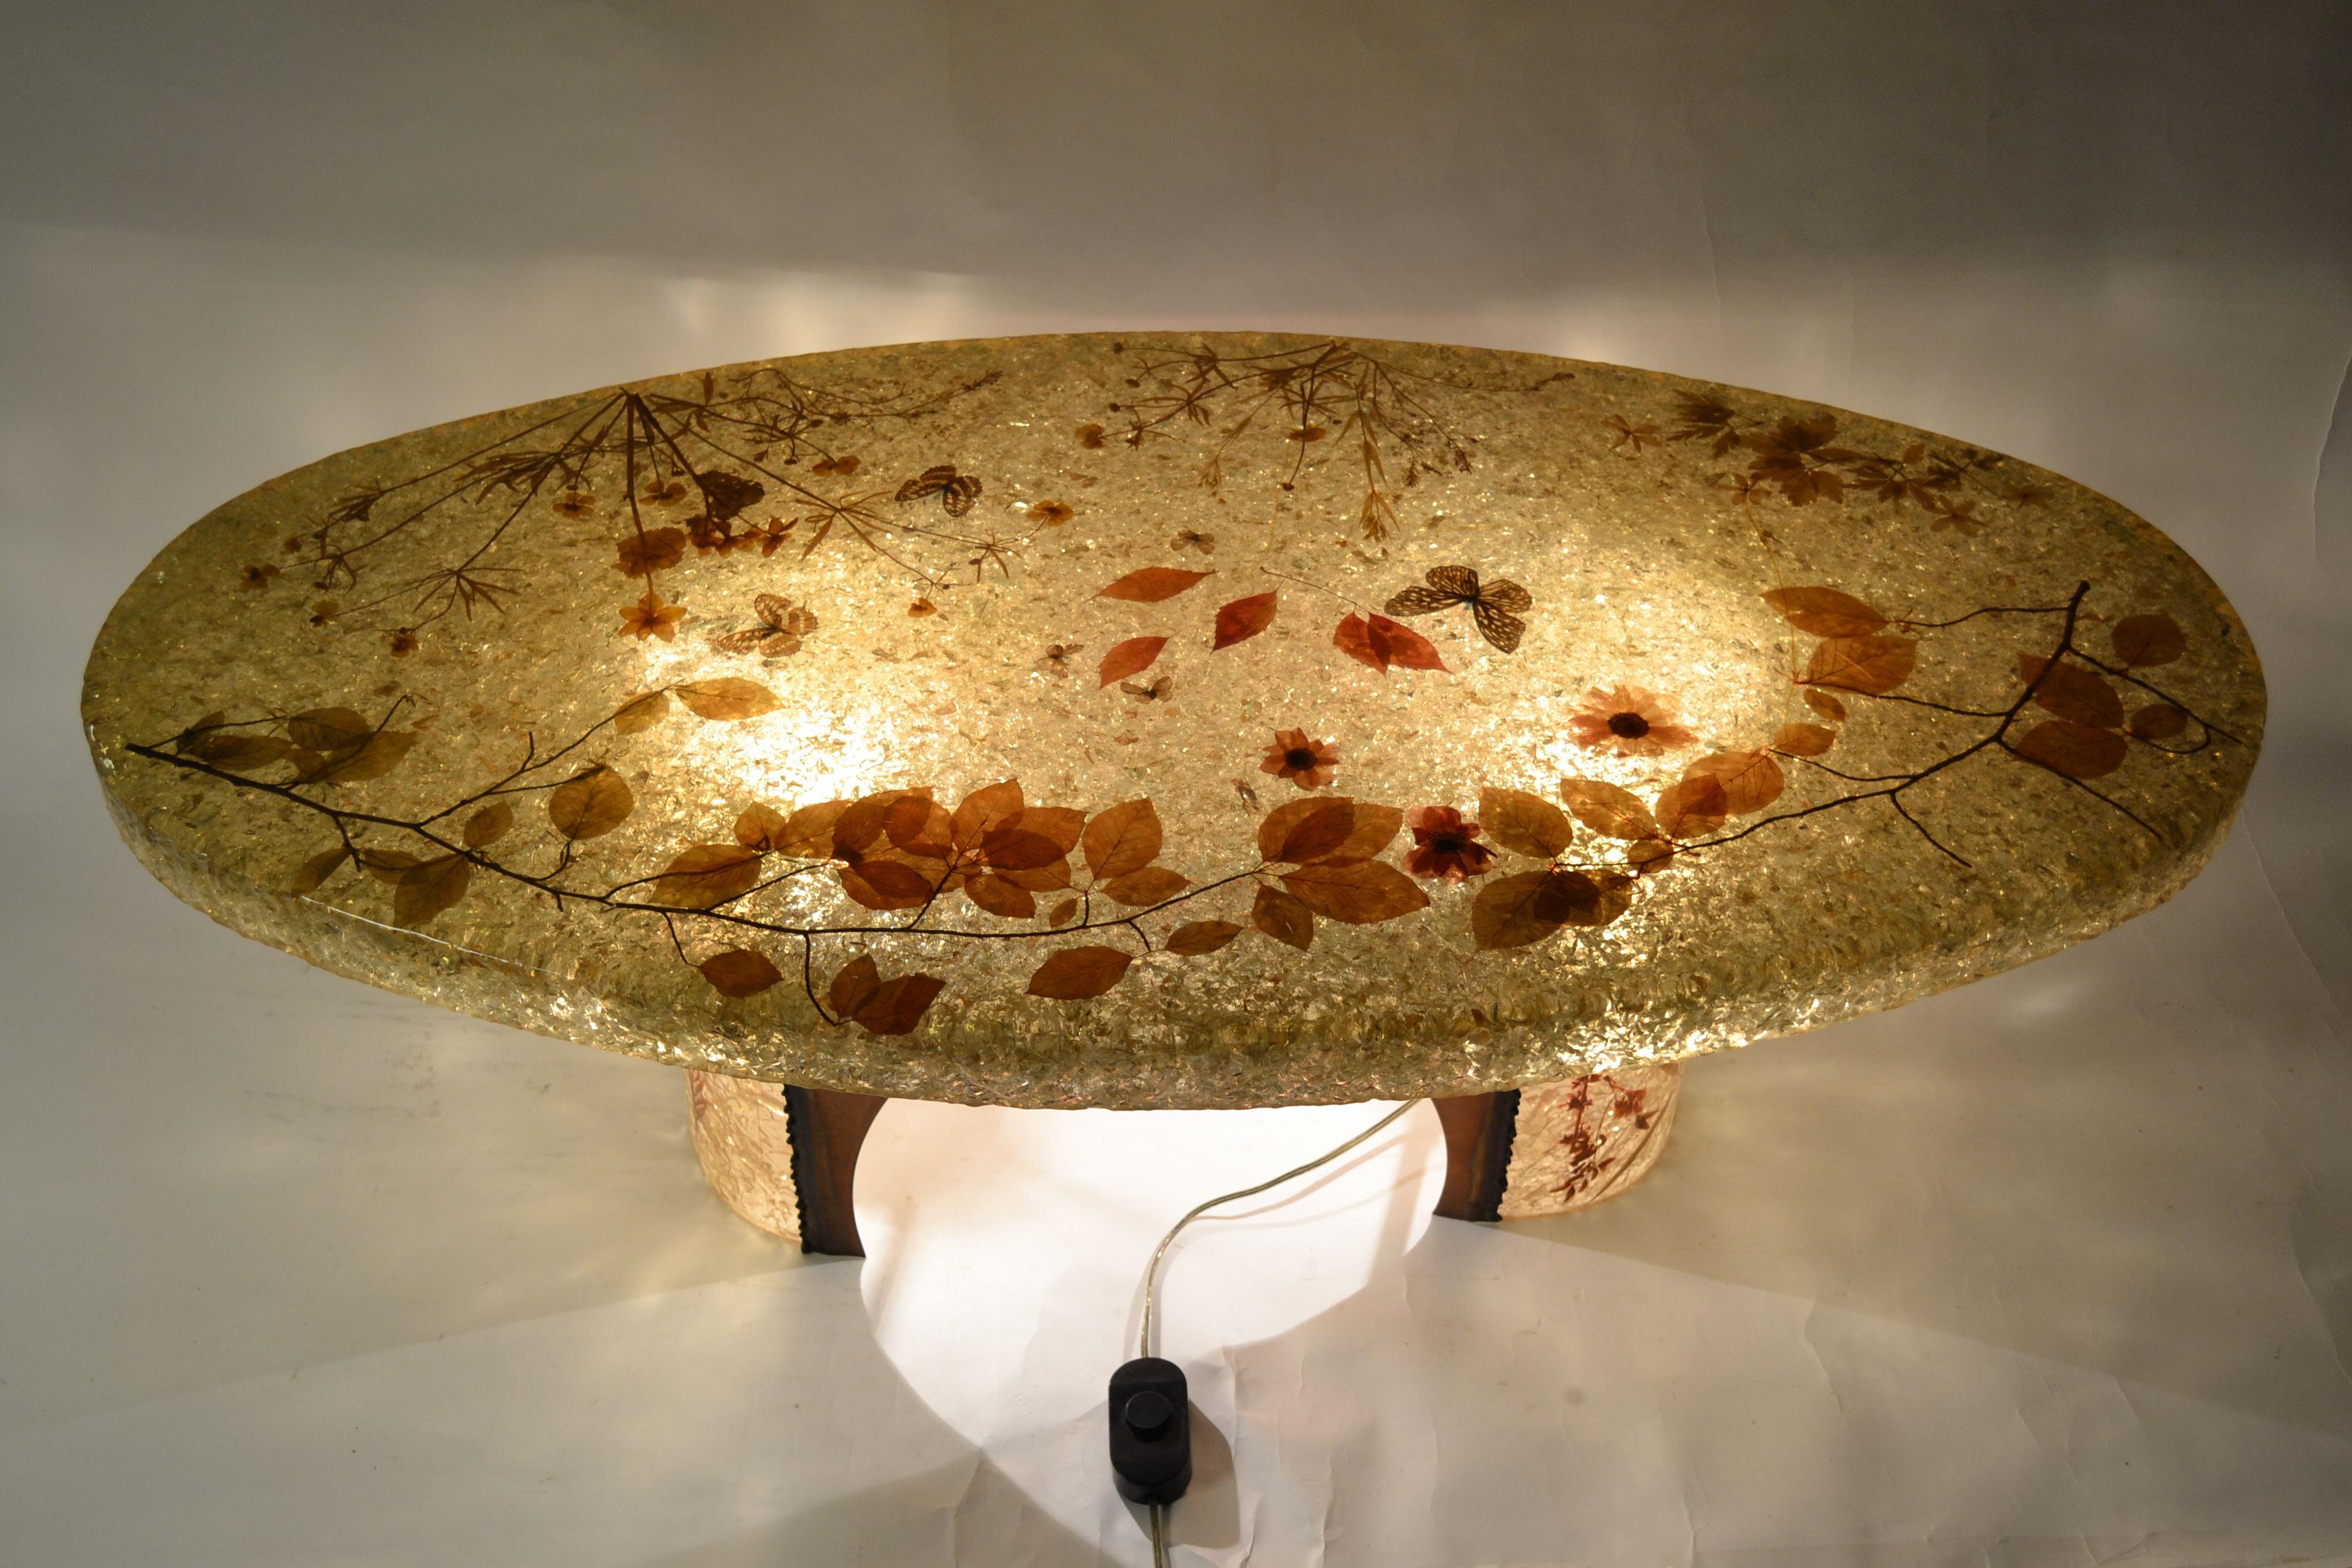 Midcentury illuminated resin coffee table from Accolay, France
D'accolay, coffee table, resin and natural elements, France, 1960s.

Naturalistic illuminating coffee table made by D'accolay in France during the 1960s.
The crackled resin top